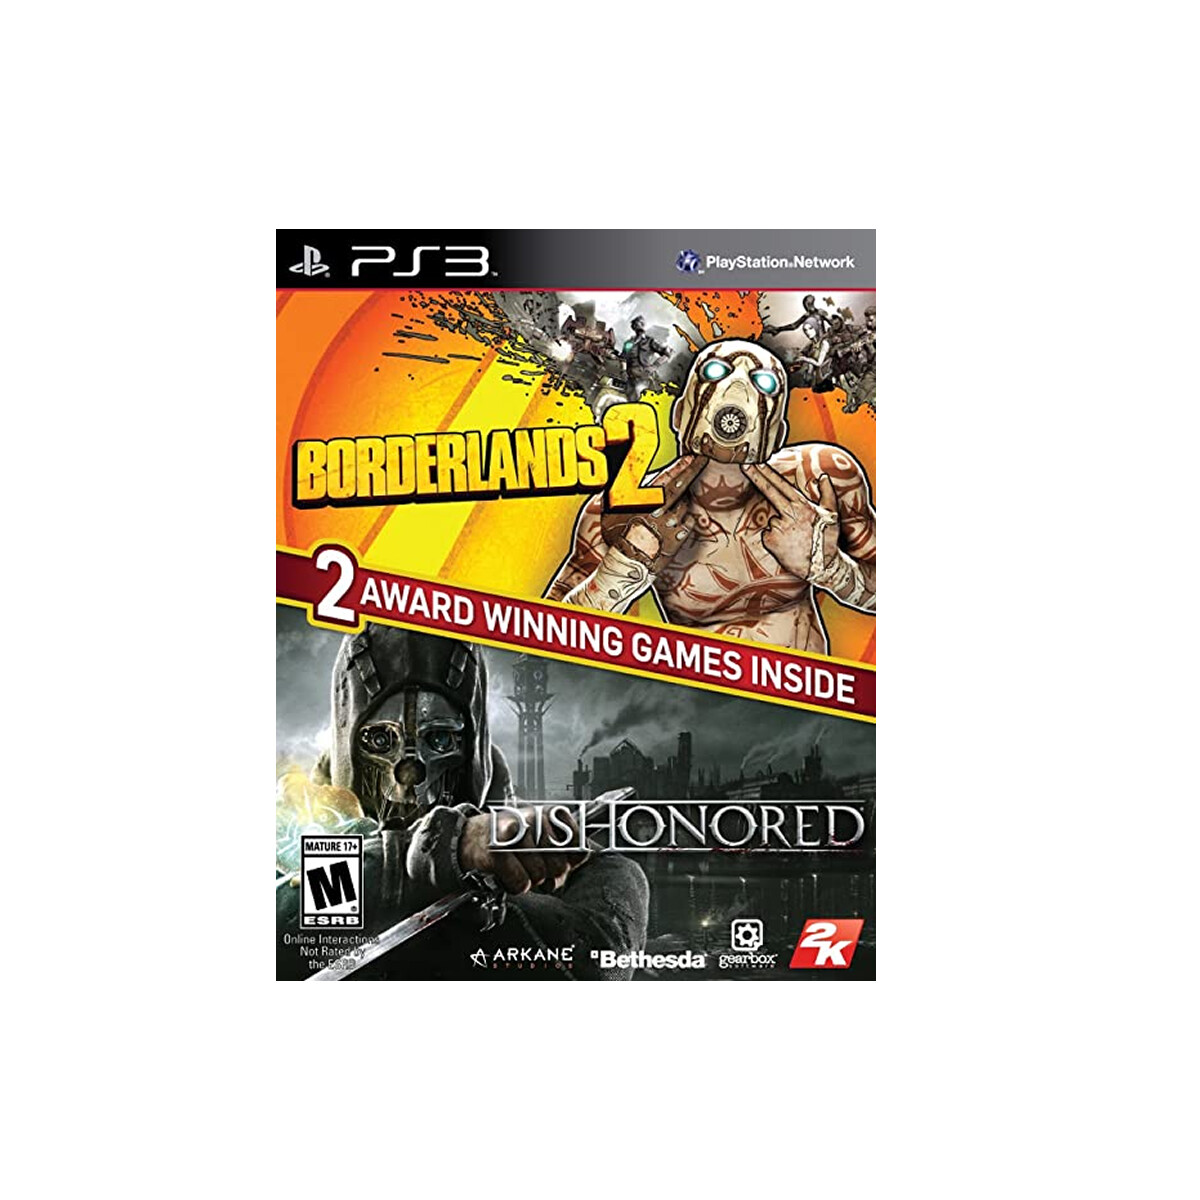 PS3 BORDERLANDS 2 + DISHONORED PACK 